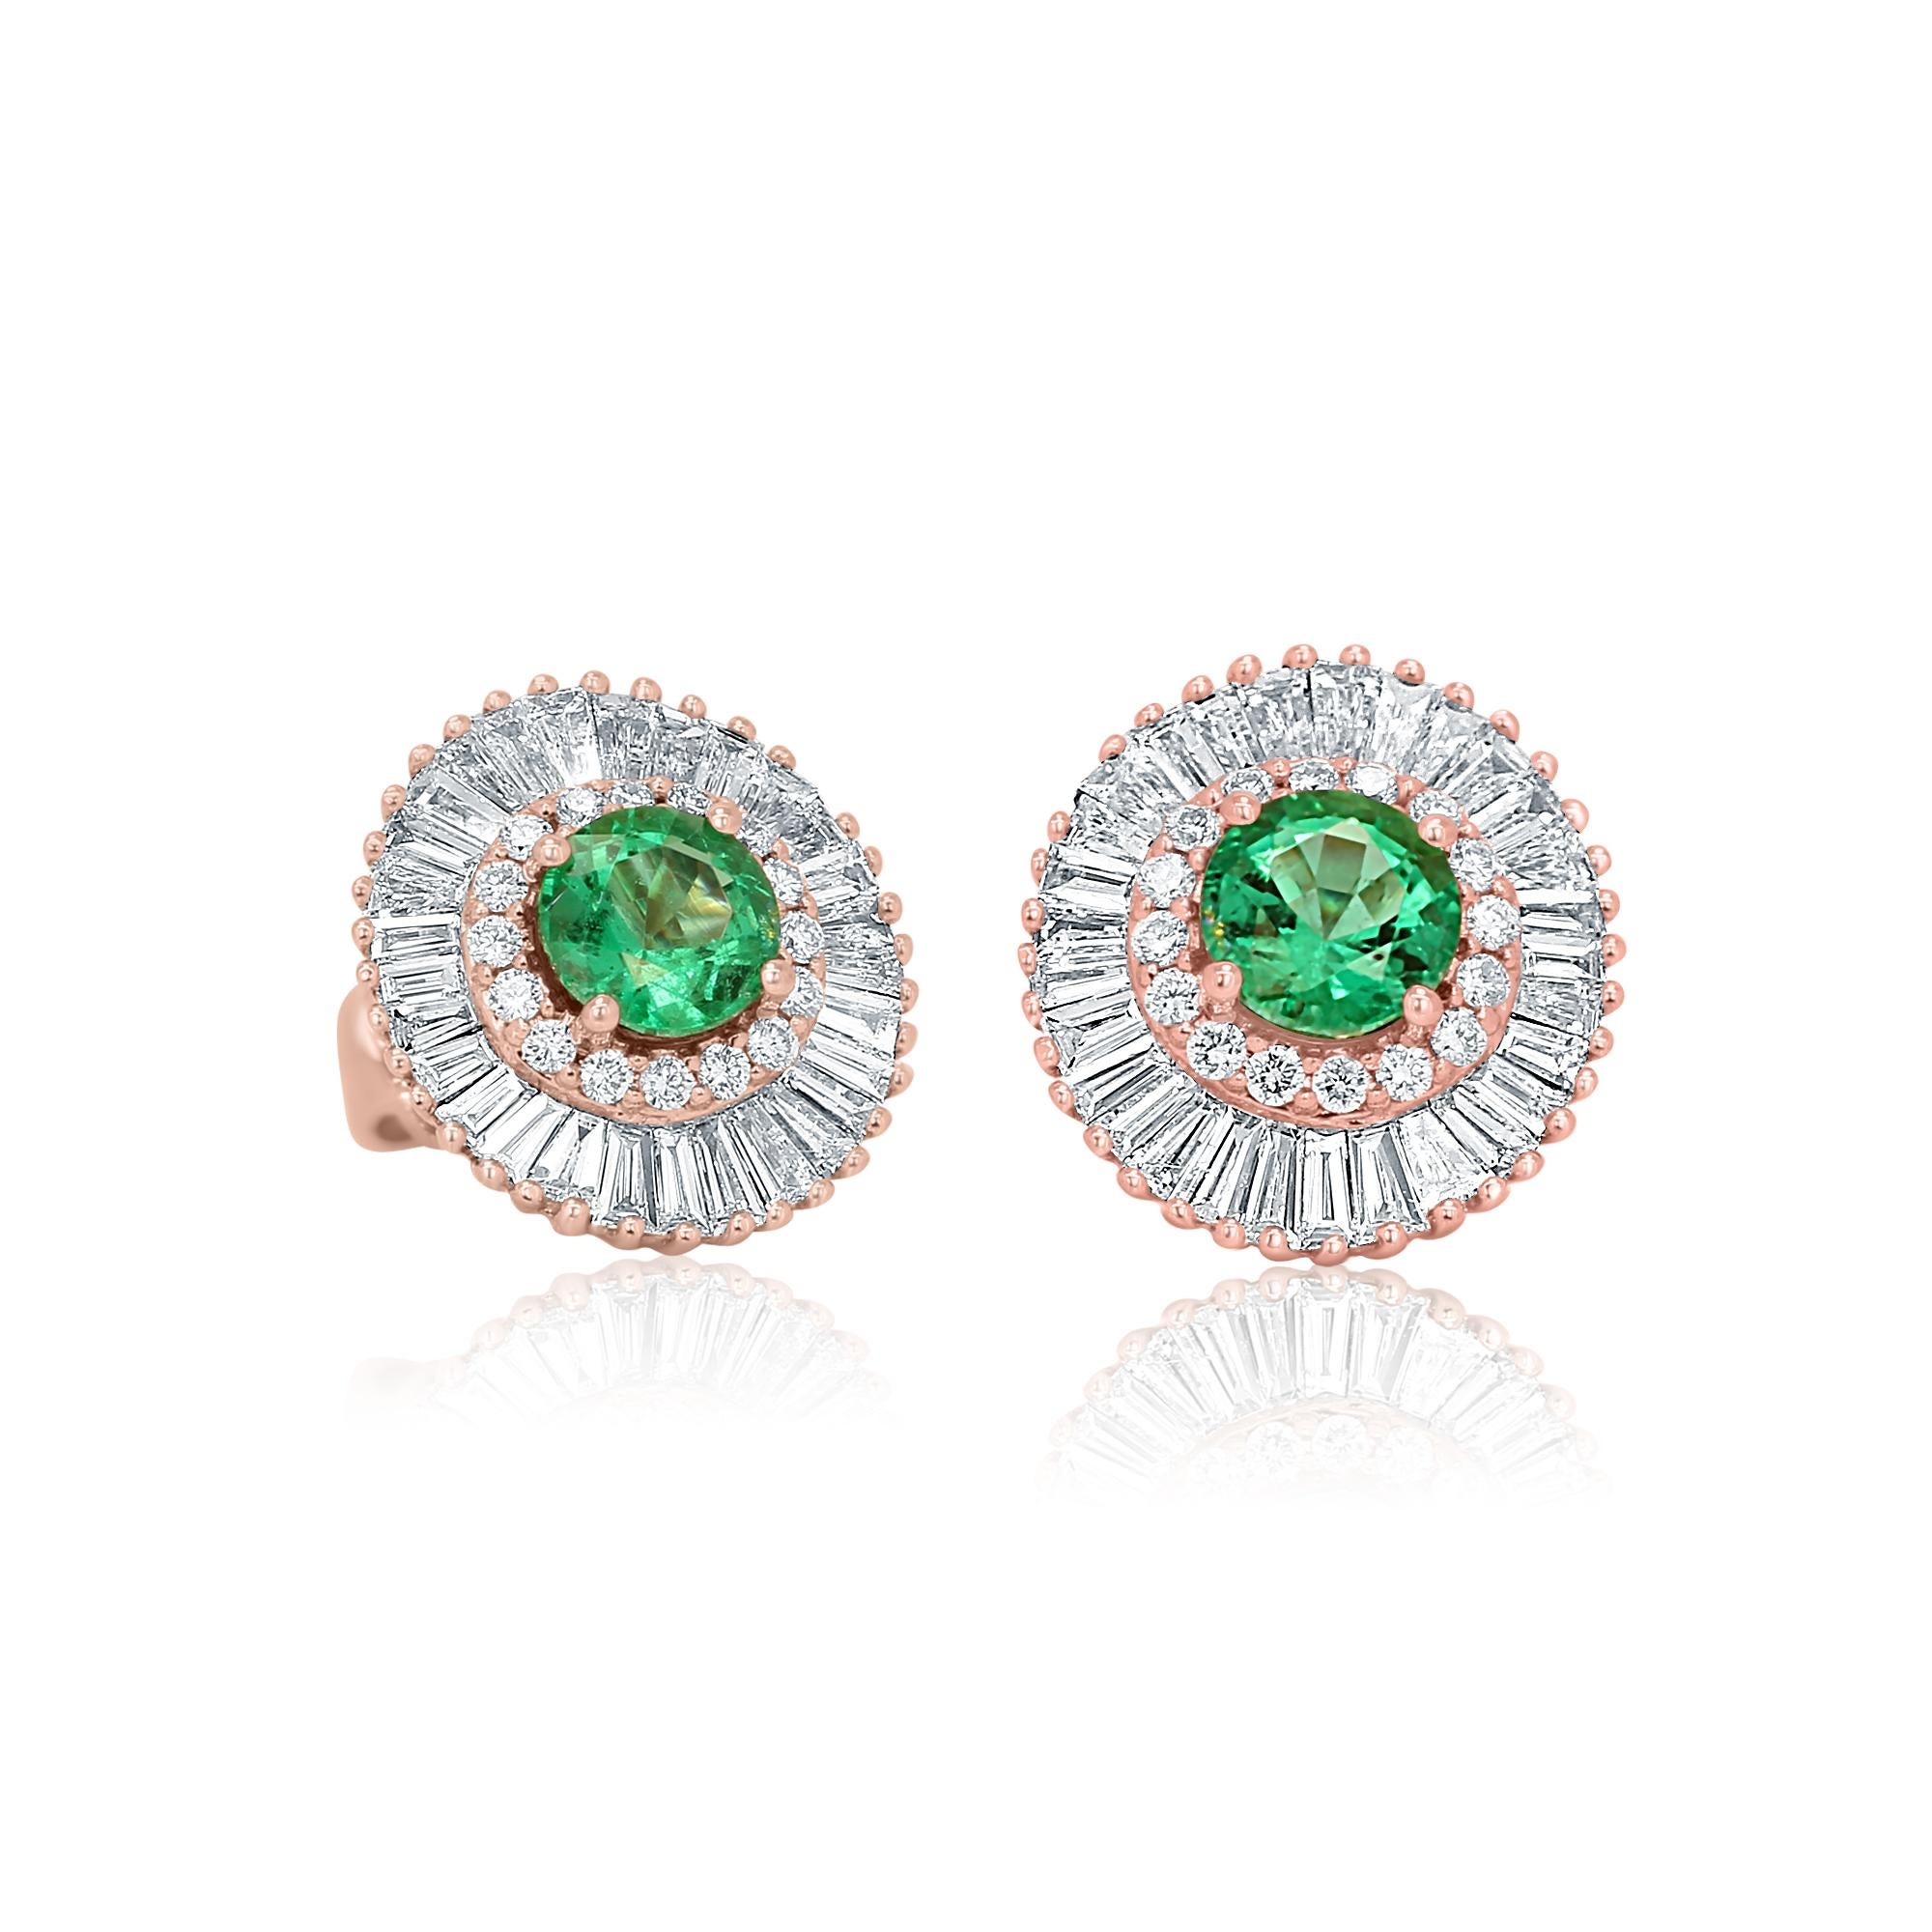 
Art Deco Style Gorgeous Emerald Round 1.10 Carat encircled in a Double Halo of White Round Diamonds 0.22 Carat and White Baguette Diamond 0.98 Carat in 14K Rose Gold Stunning Ballerina Style Stud Earring.

Center Emerald Weight 1.10 Carat
TOTAL